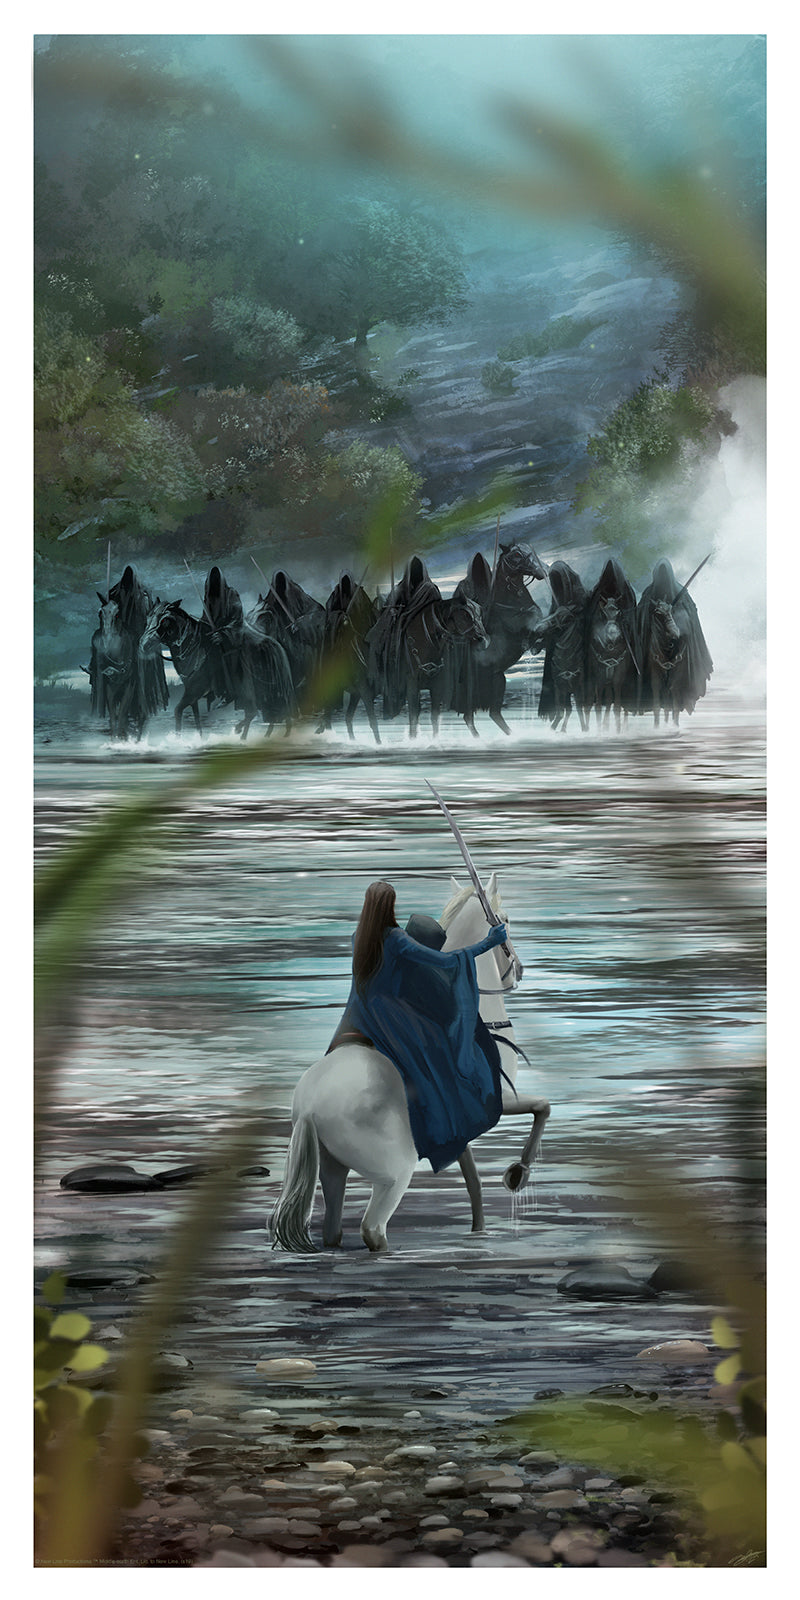 Andy Fairhurst "The Lord of the Rings - Arwen"